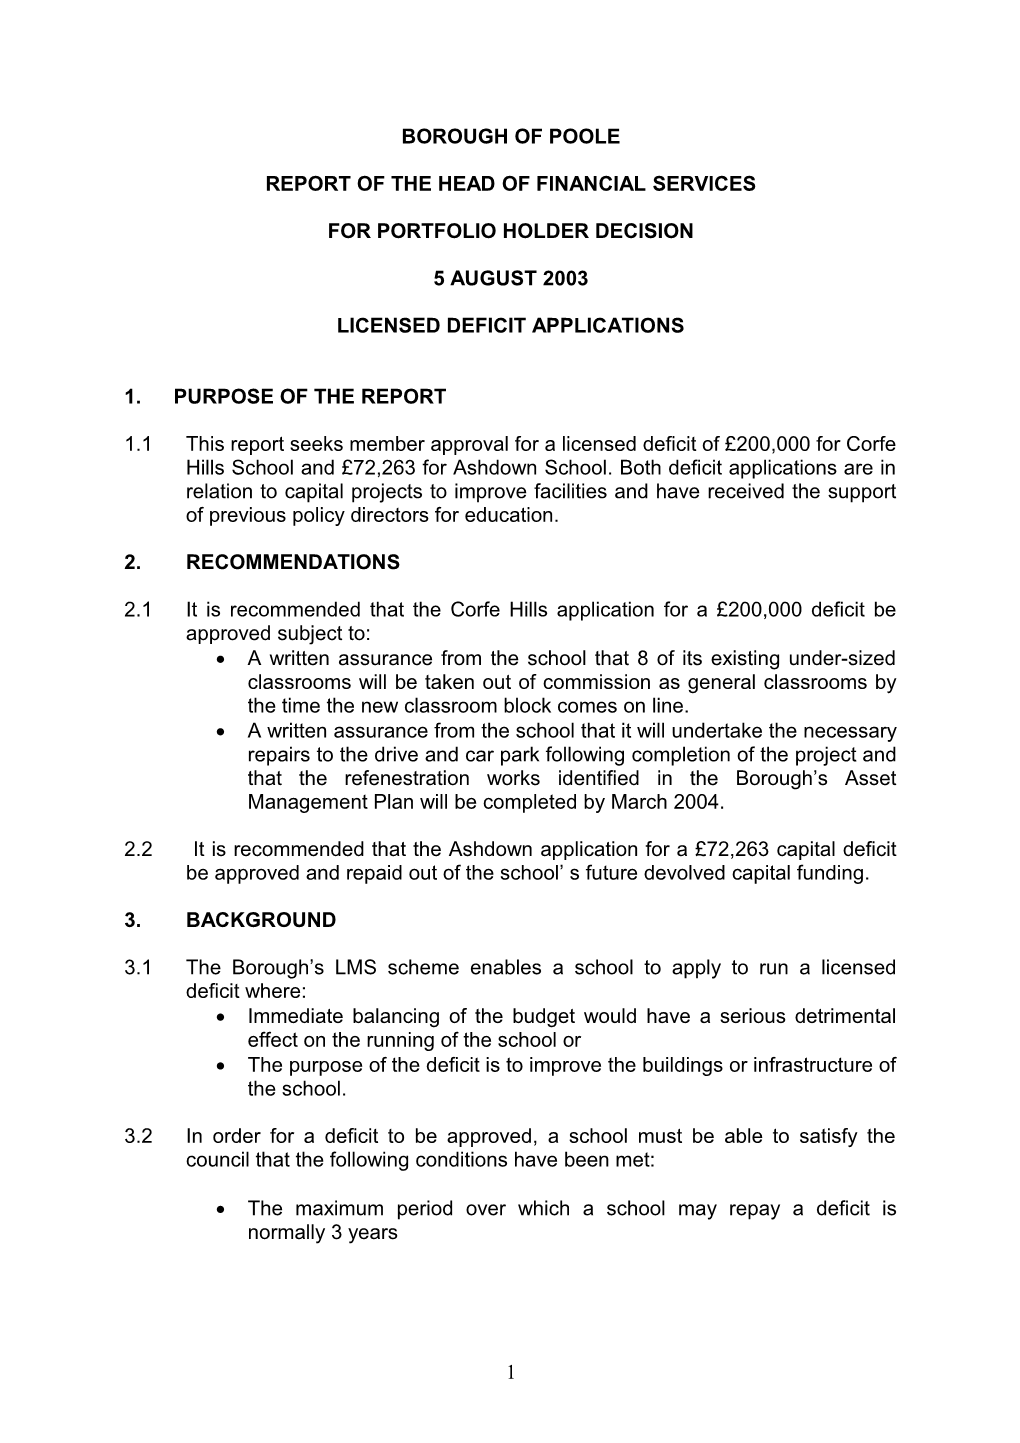 PD 5 August 2003 - Report - Licensed Deficit Applications